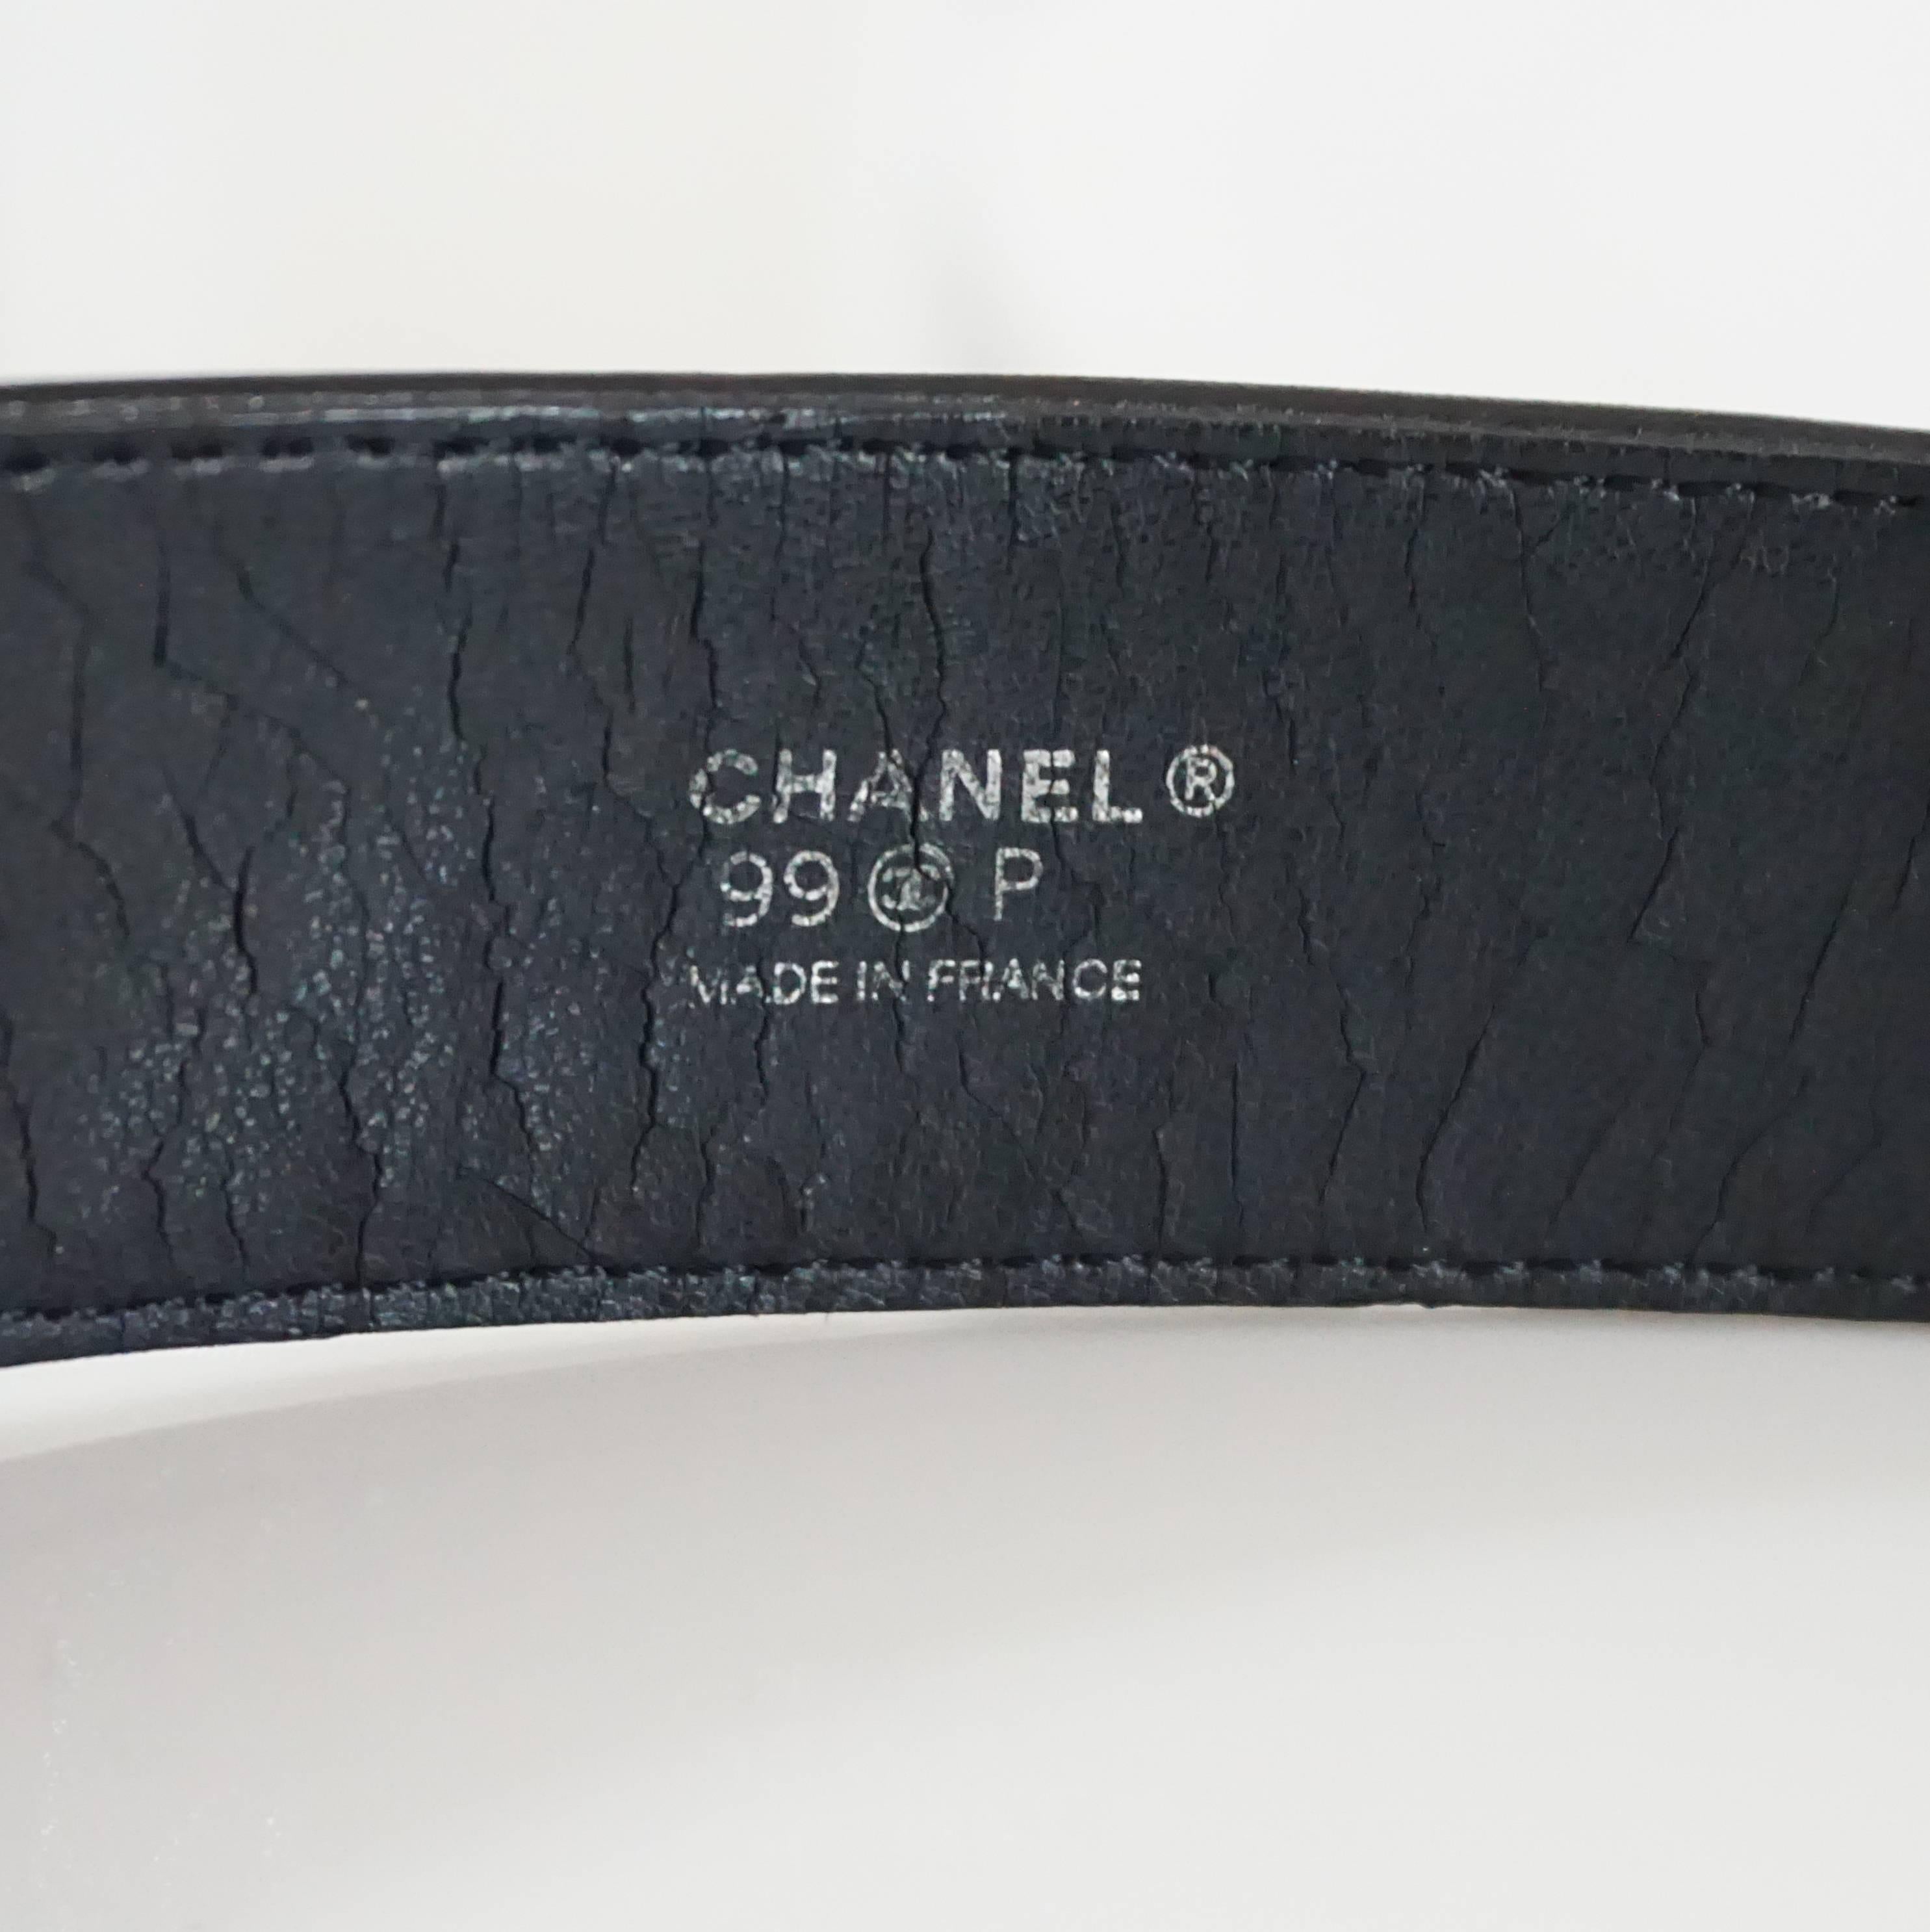 Gray Chanel Black Leather Belt with Silver Logo Buckle - 32